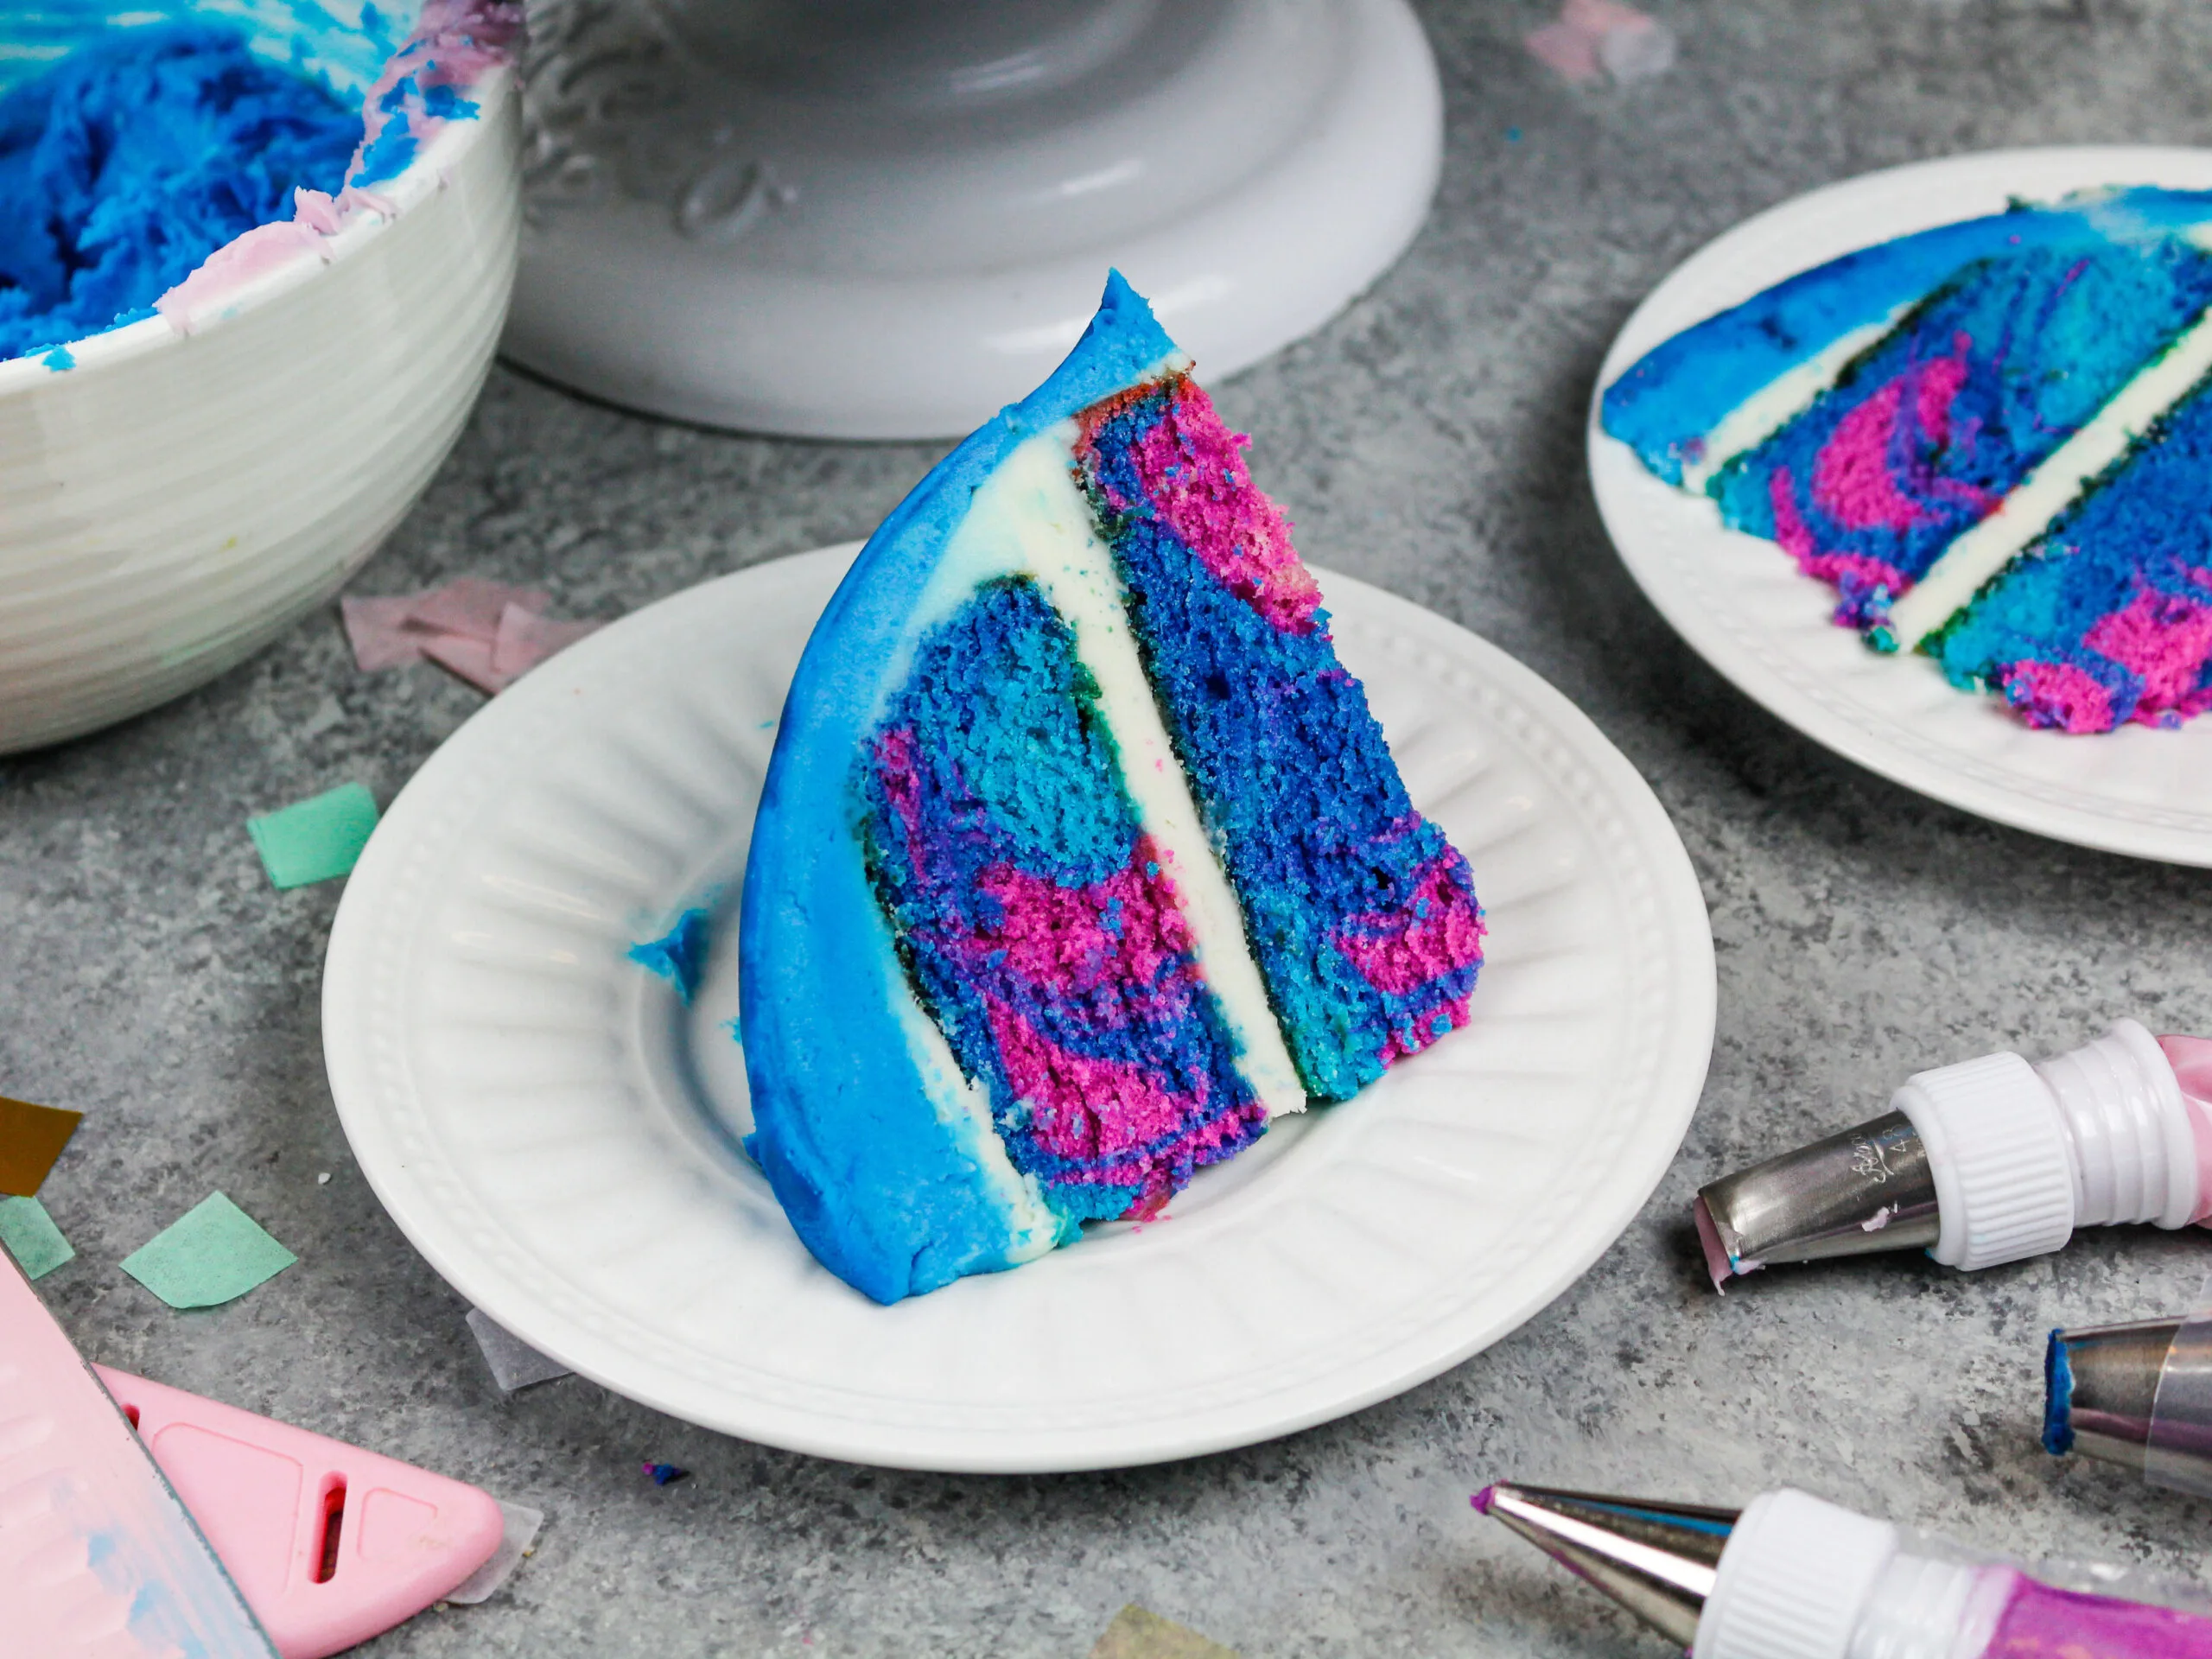 image of a purple and blue cake slice